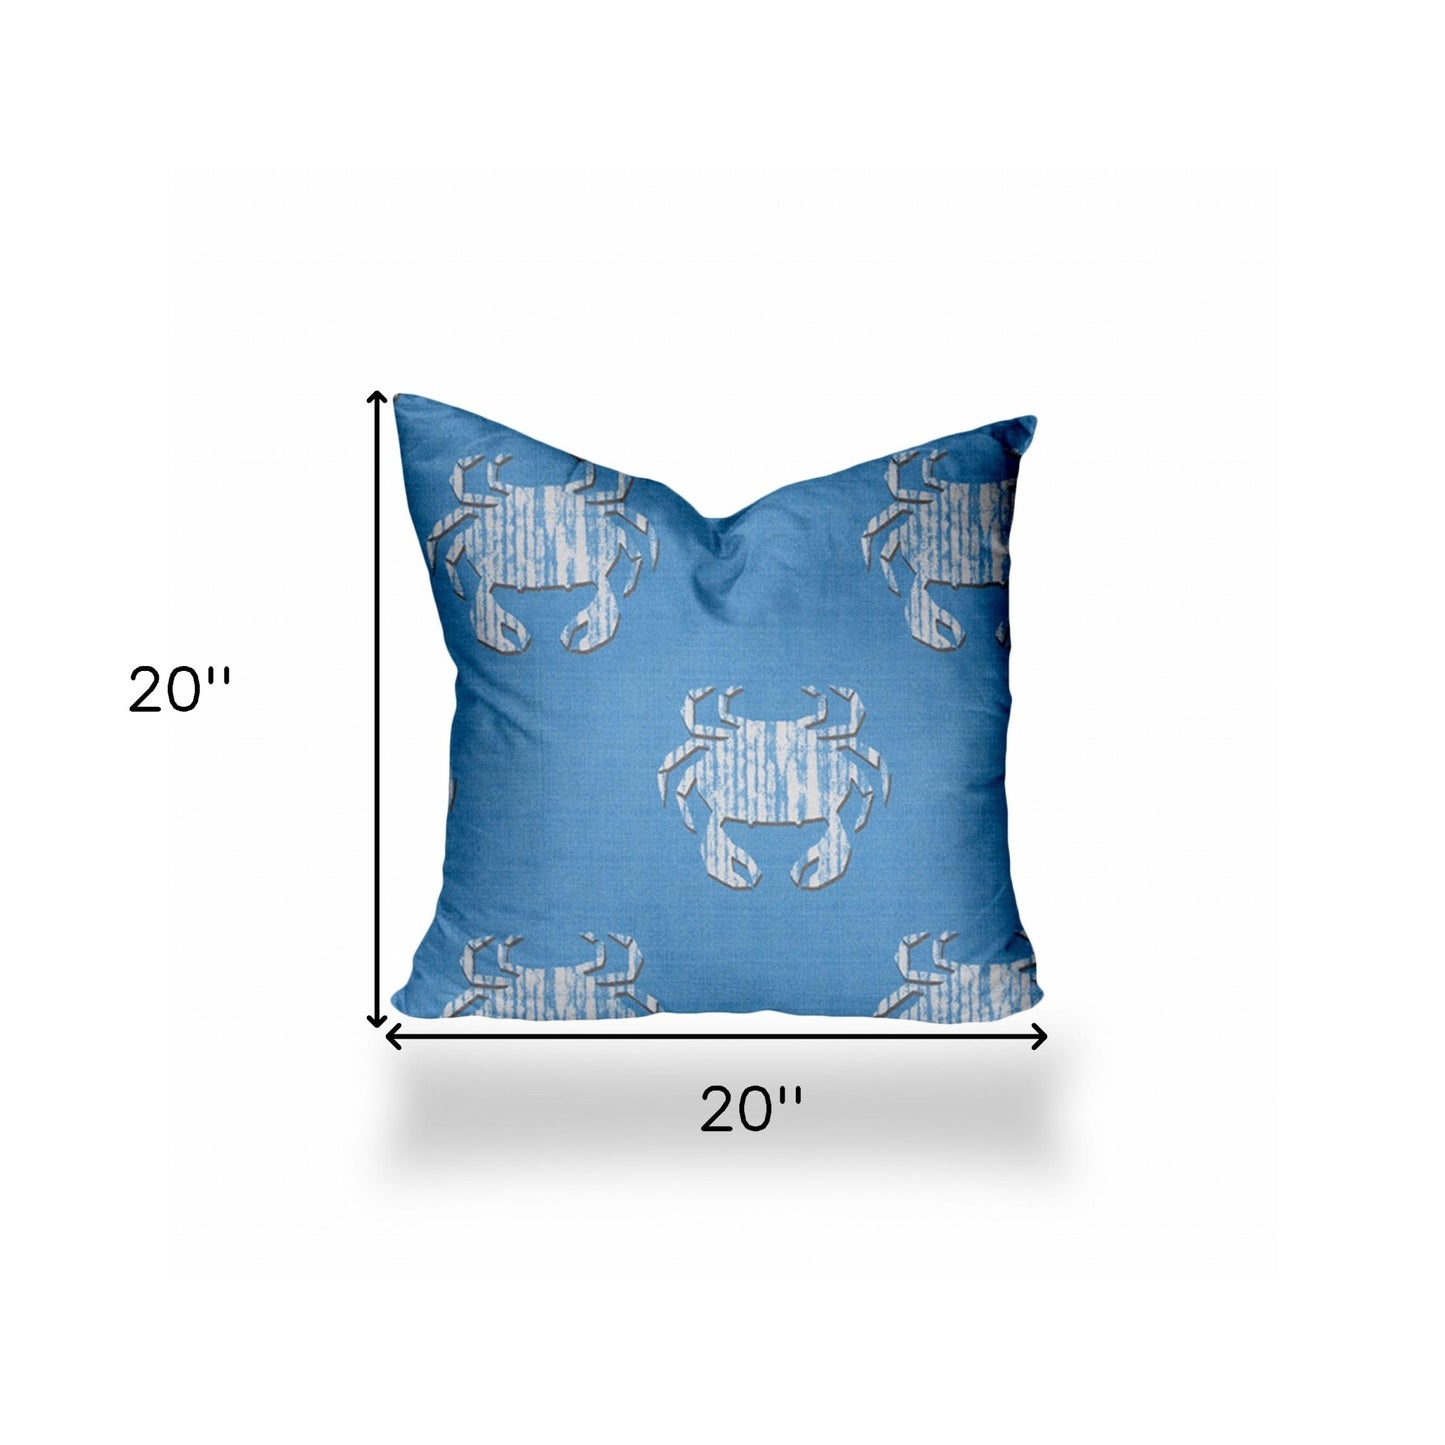 20" X 20" Blue And White Crab Zippered Coastal Throw Indoor Outdoor Pillow Cover